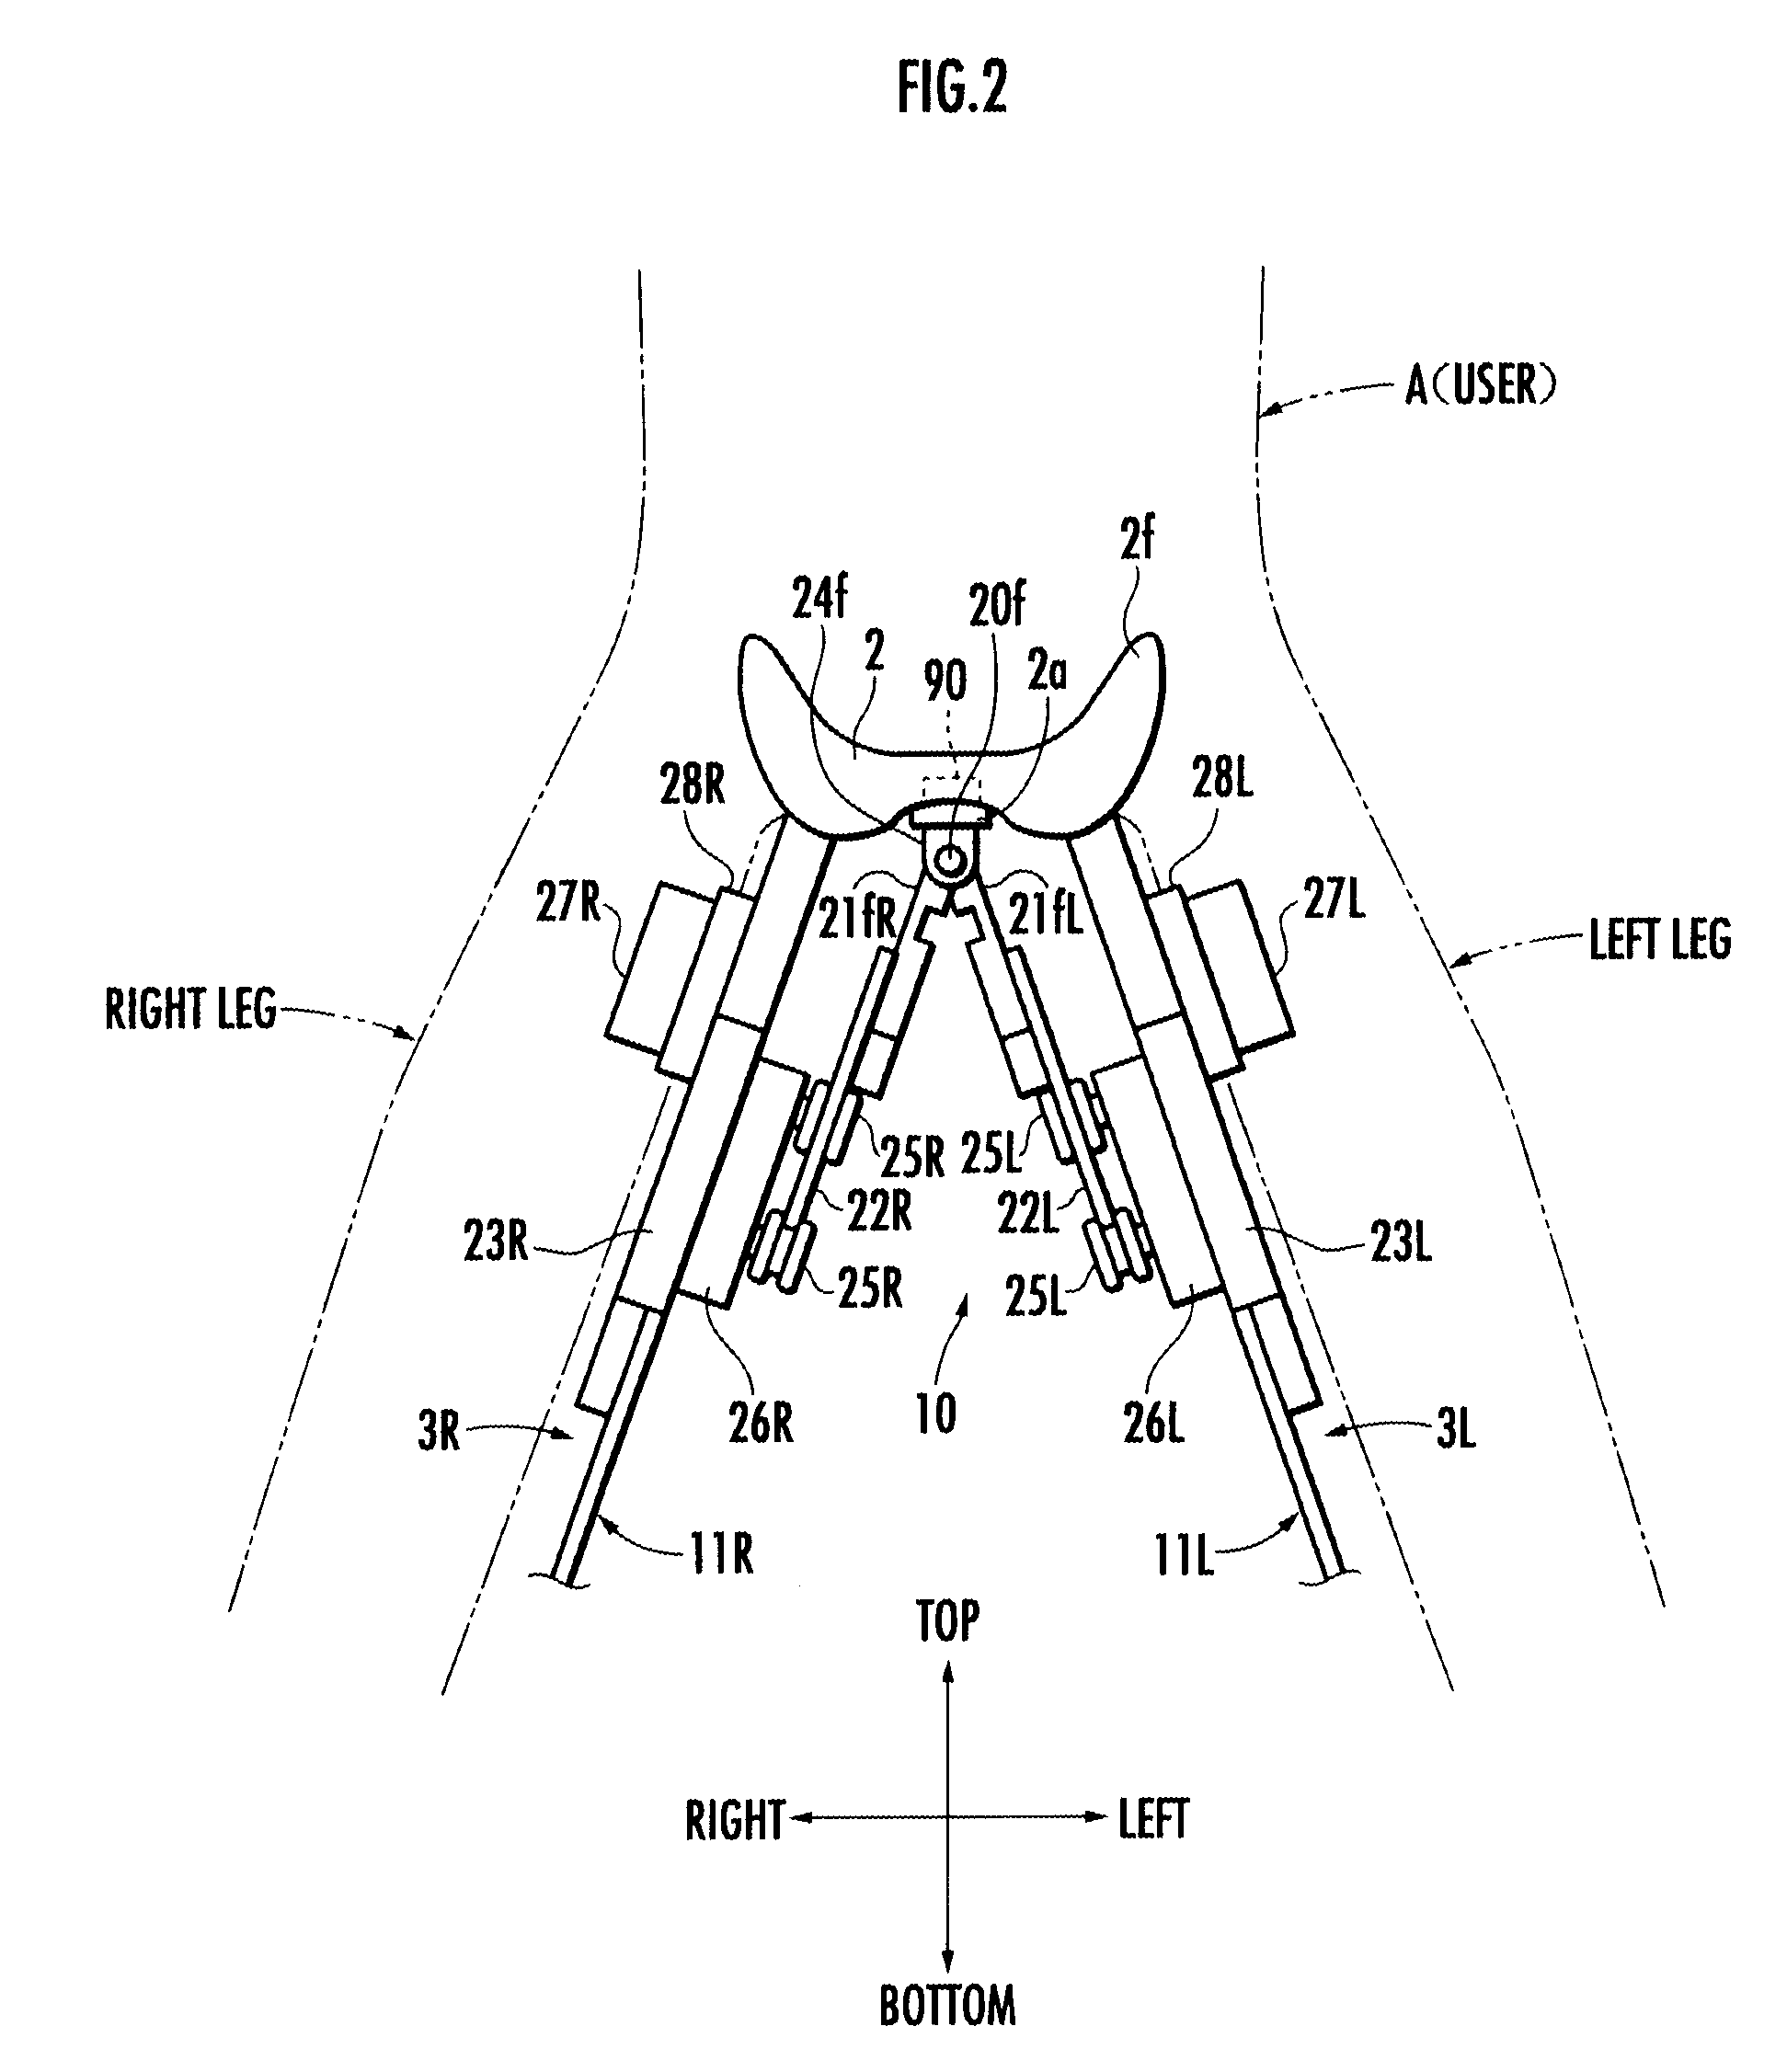 Control device for walking assistance device